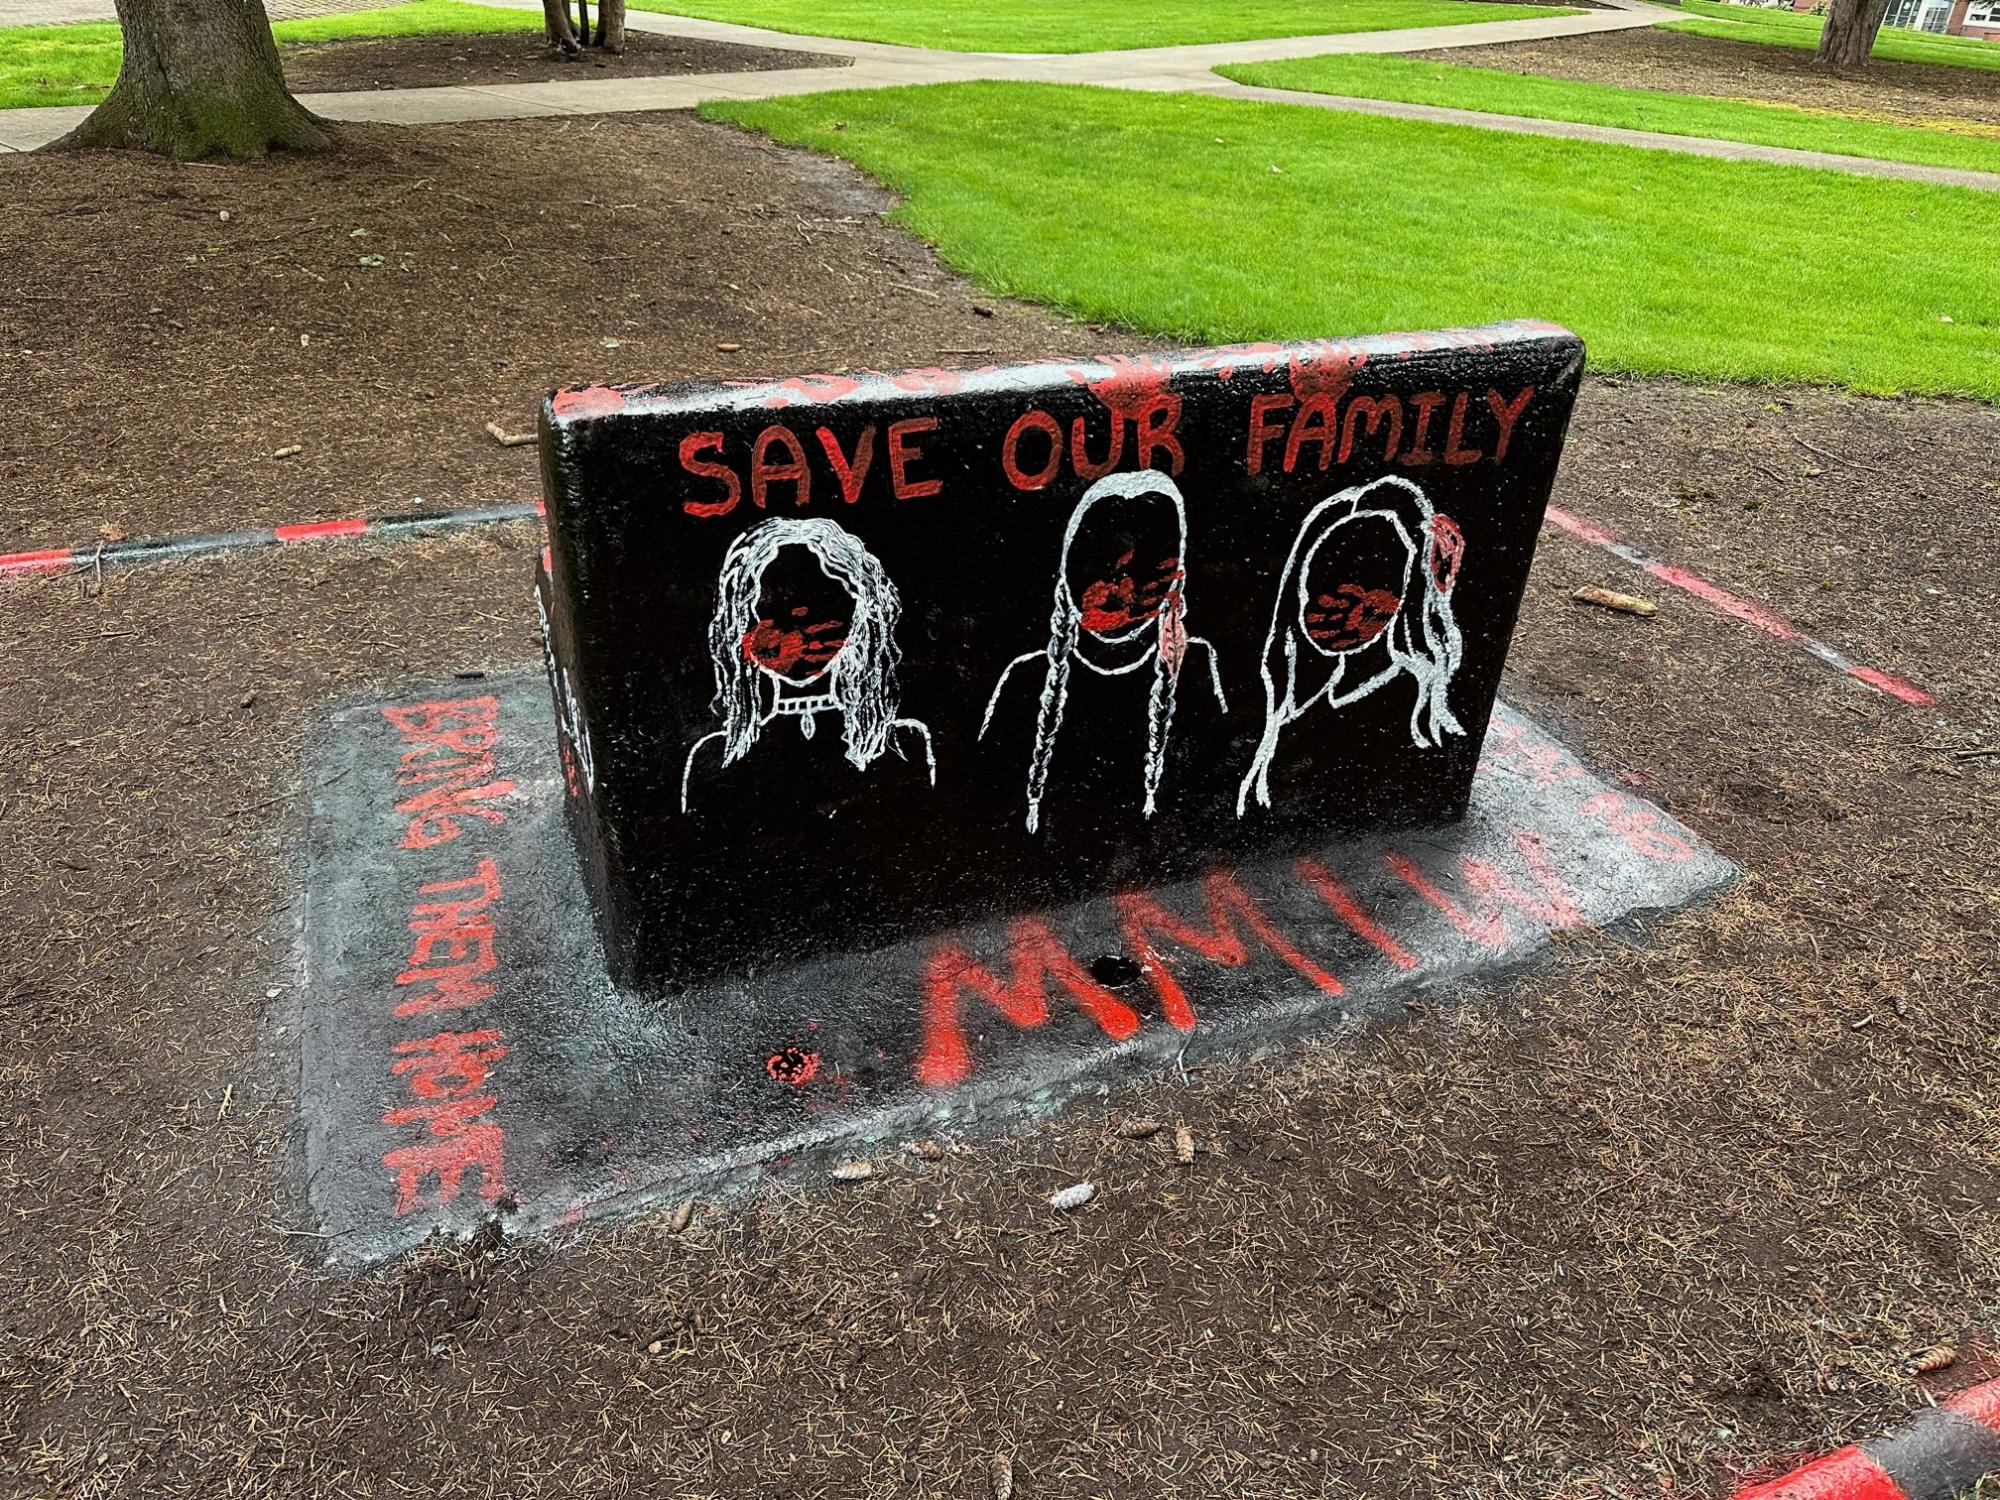 Spirit Bench painted with missing and murdered indigenous women awareness graphics